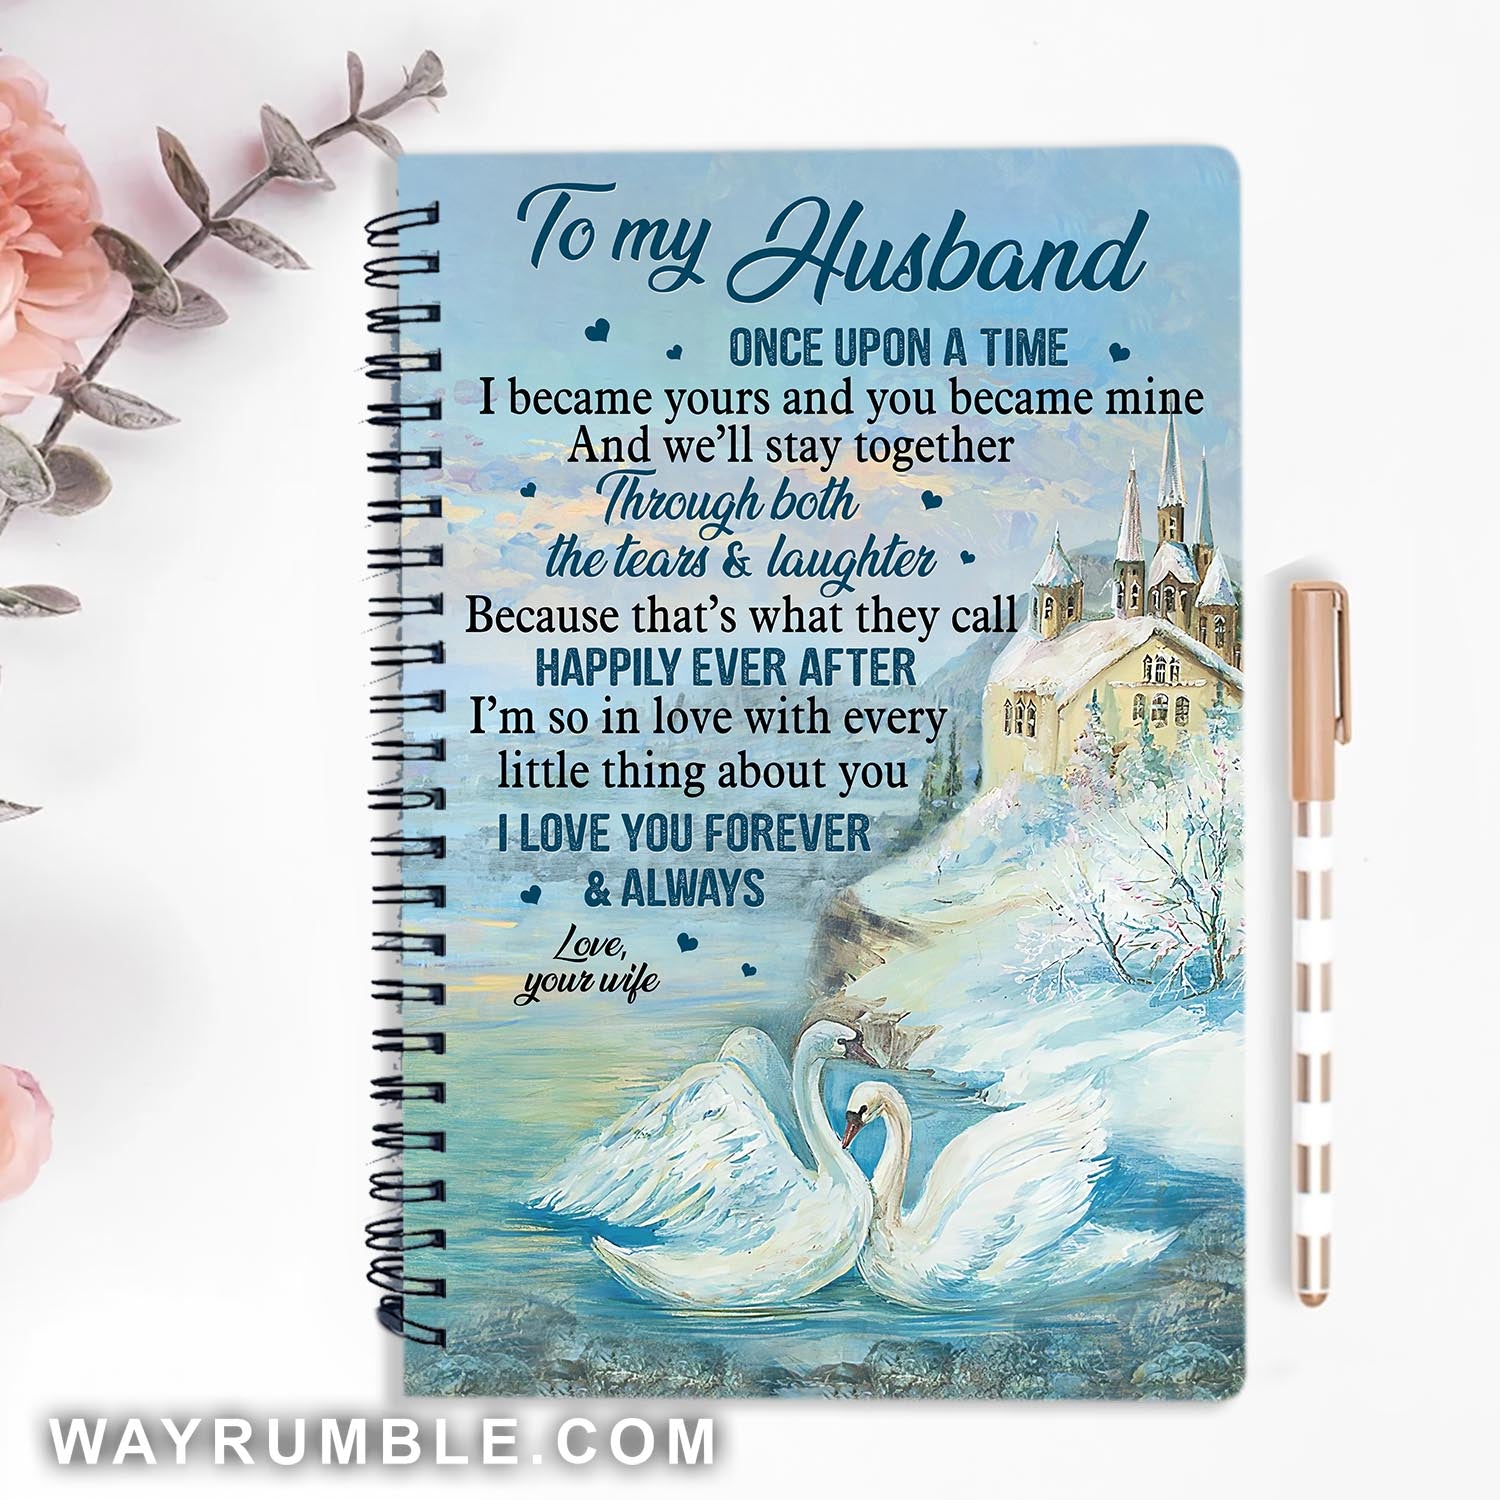 To my husband, Swan drawing, I love you forever and always - Couple Spiral Journal